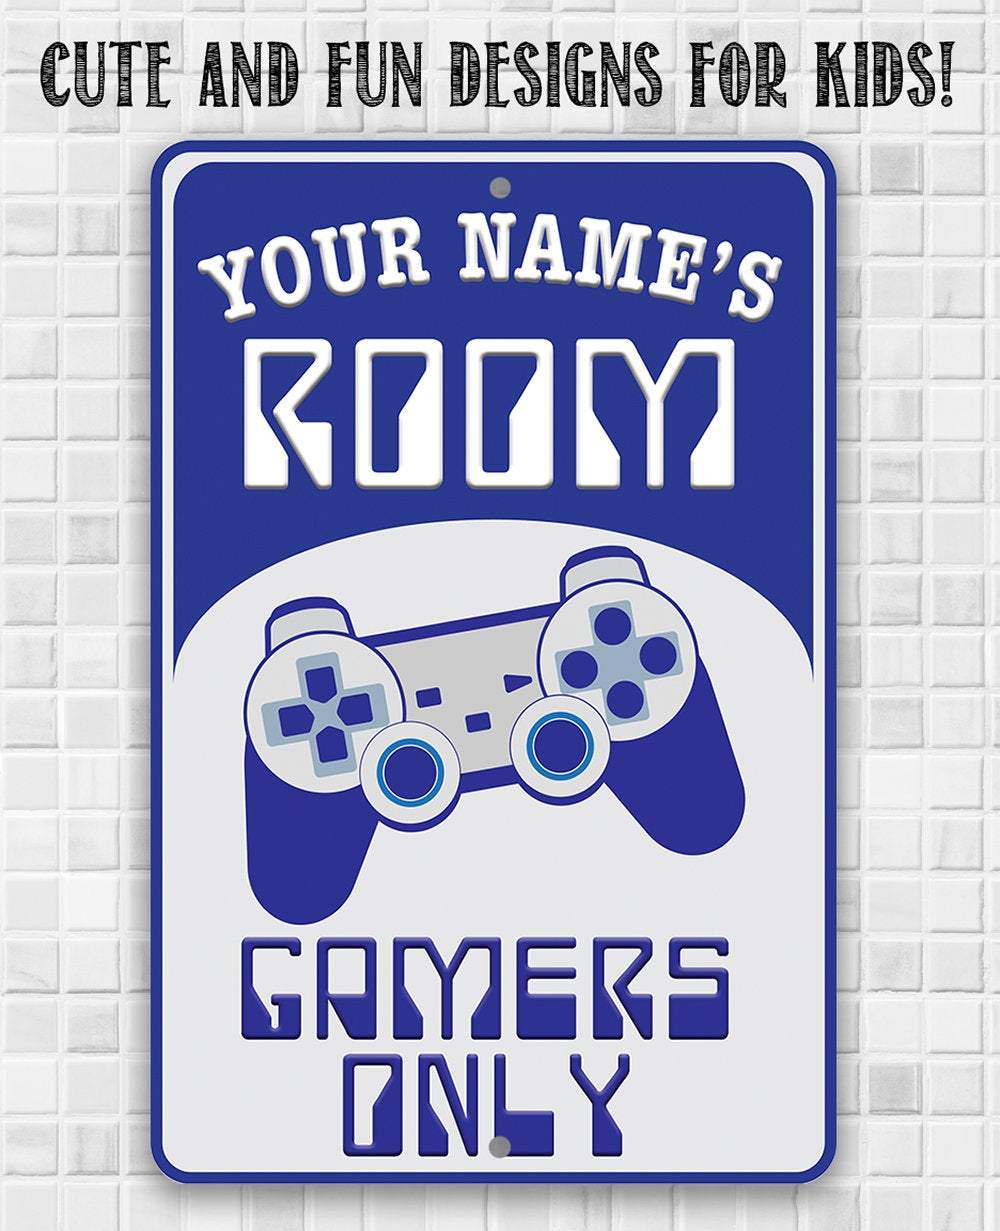 Personalized - Gamers Only - Blue - Metal Sign | Lone Star Art.